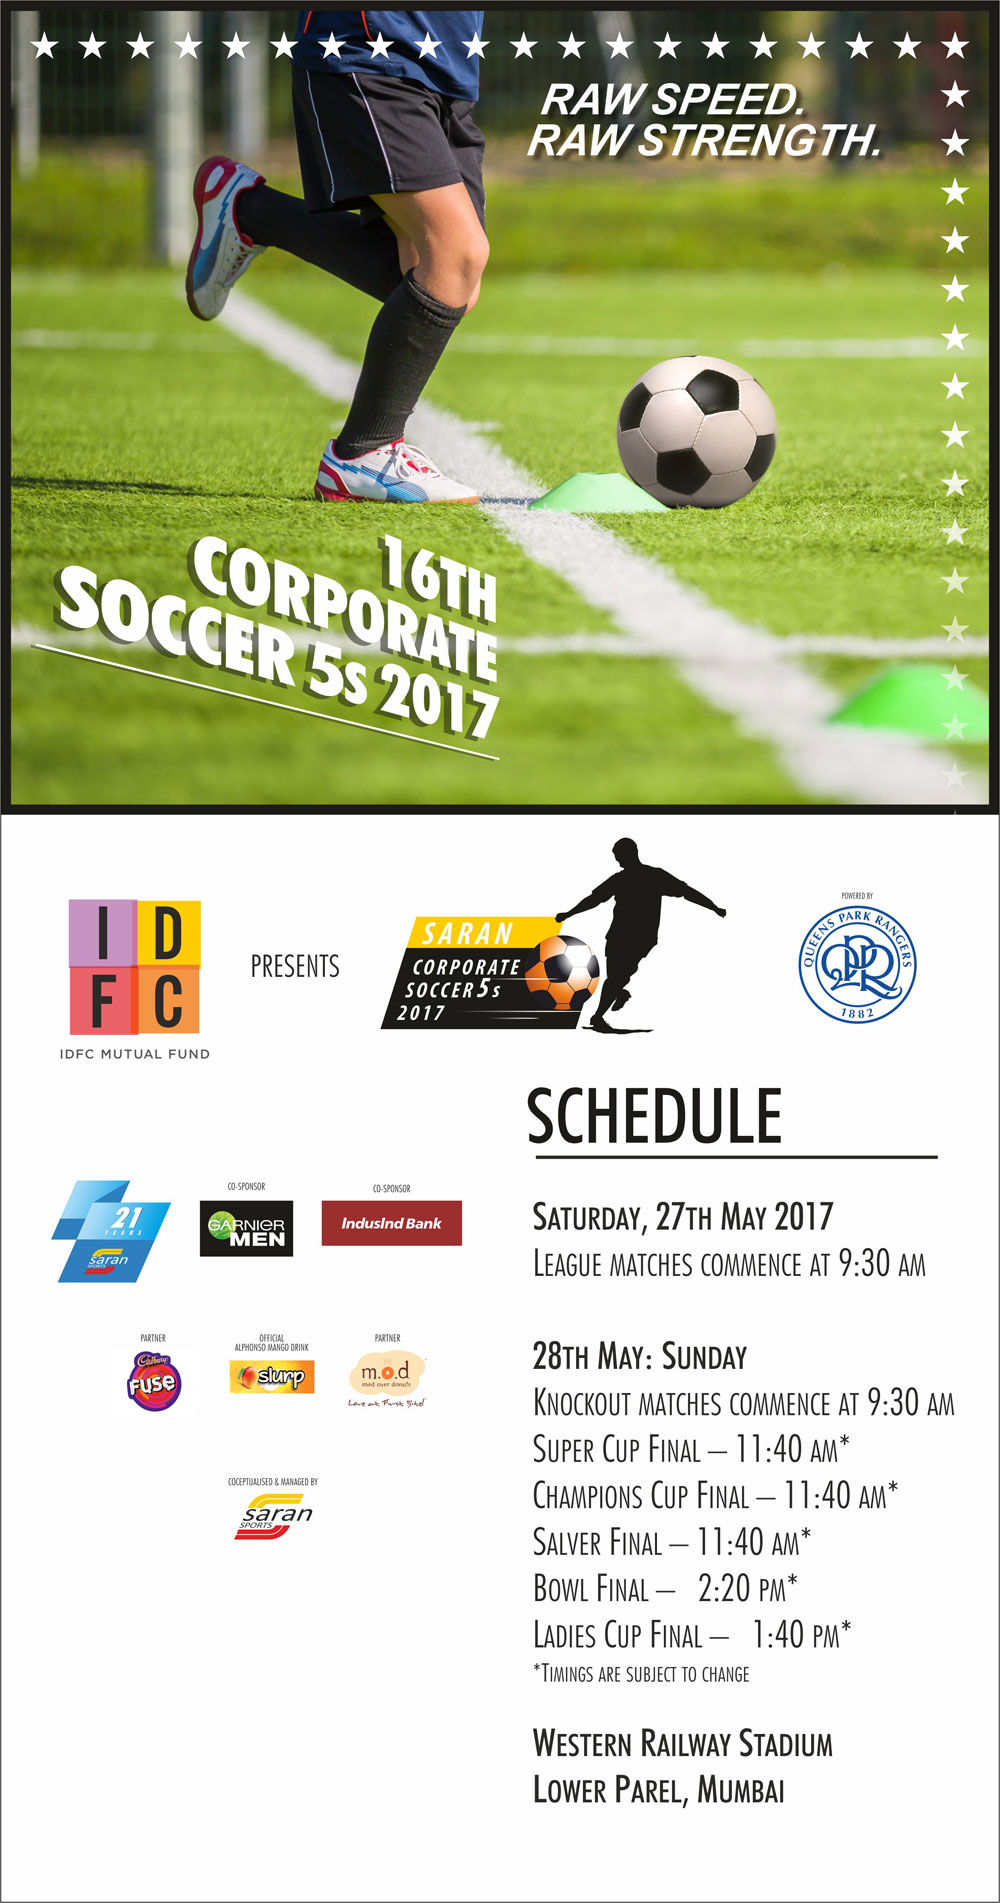 16th Corporate Soccer 5s 2017